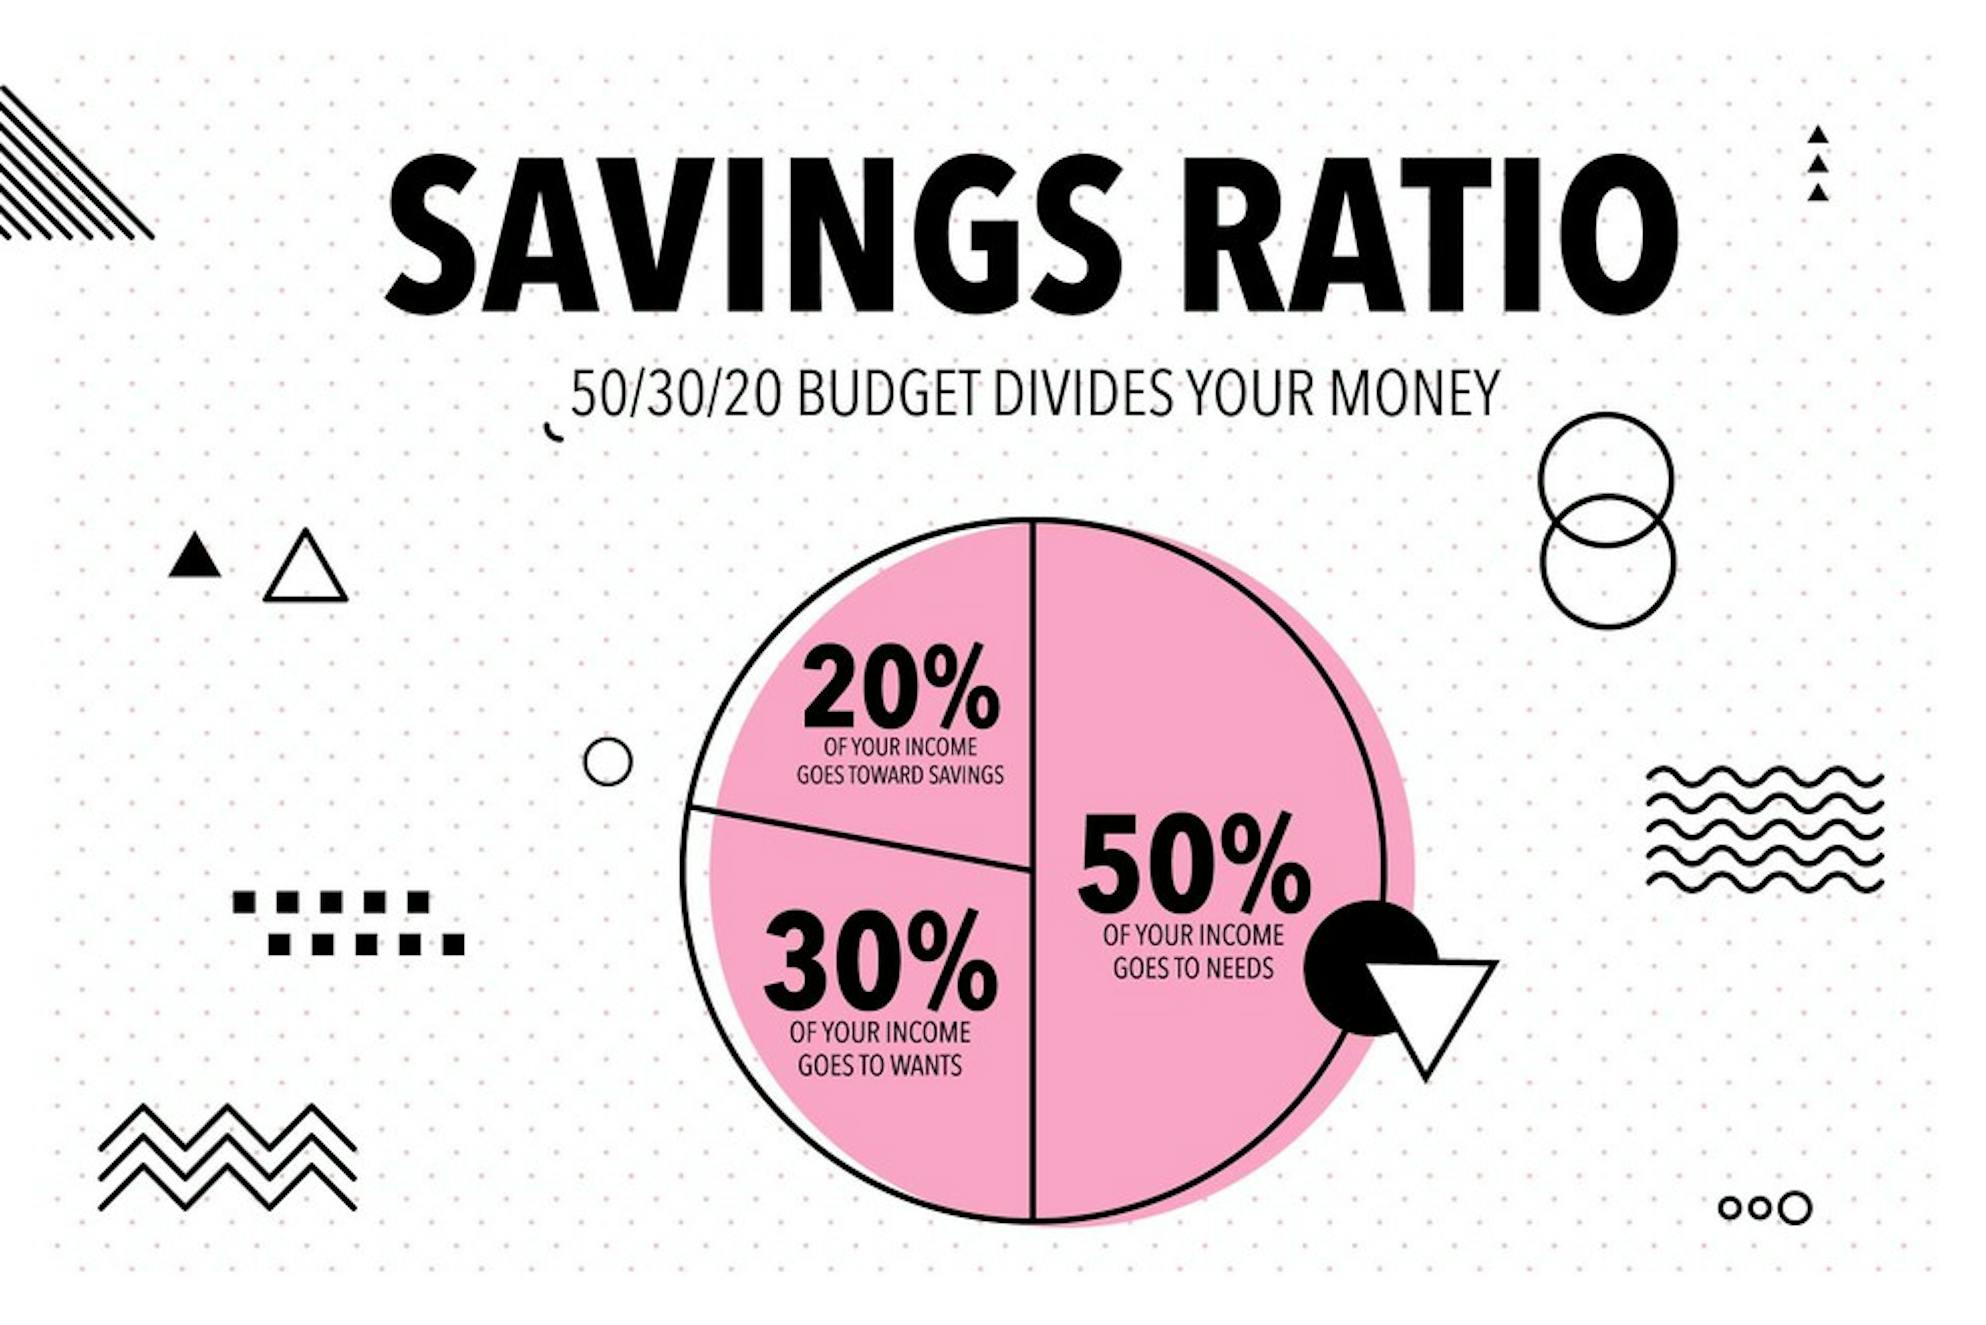 The 50/30/20 savings ratio explained in a pink pie chart